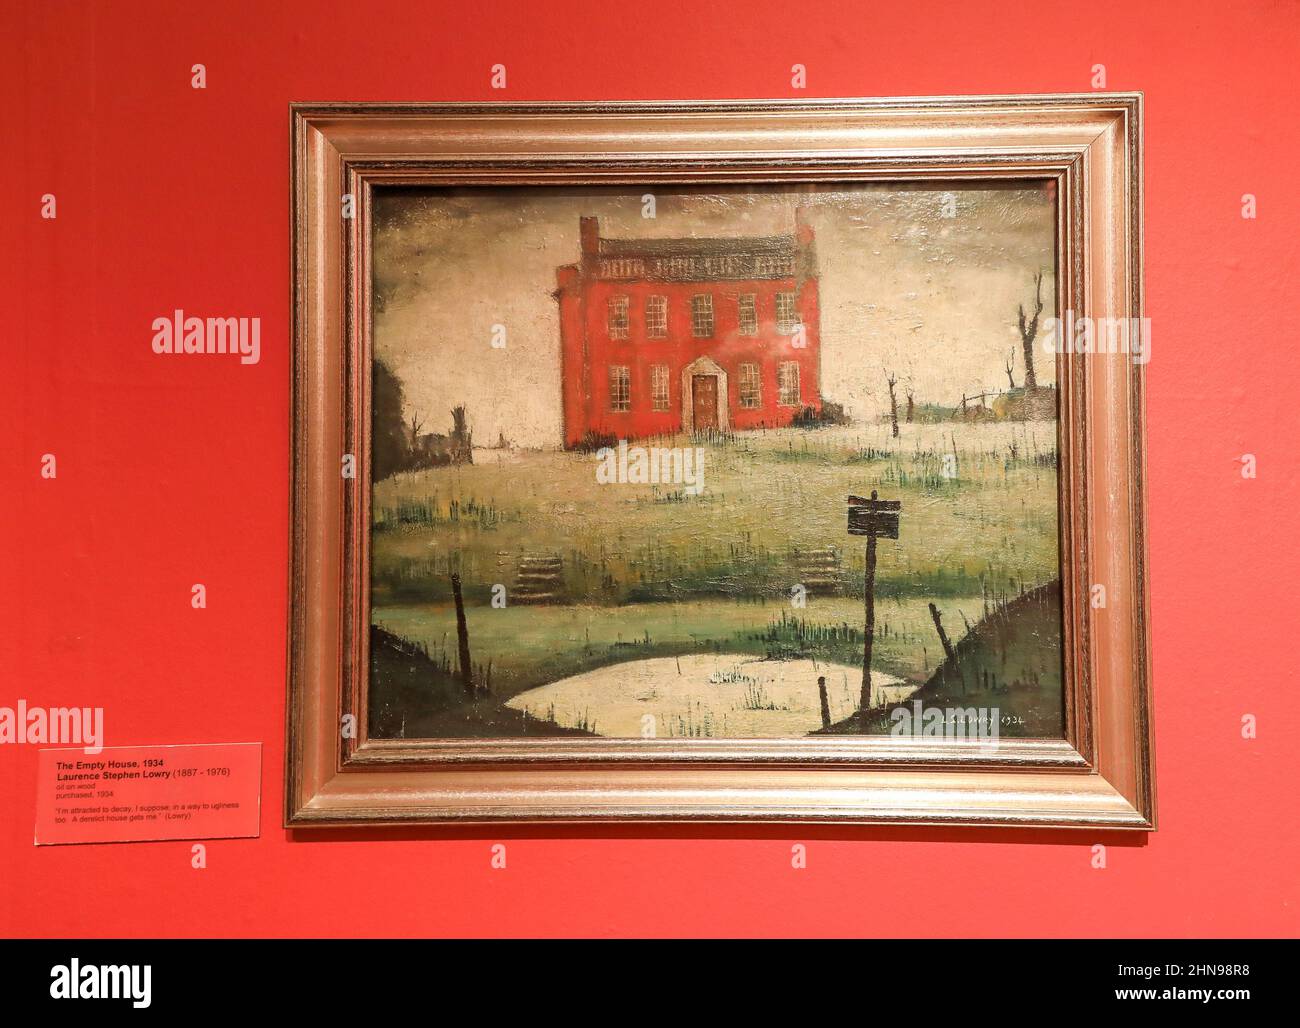 A picture called 'The Empty House' by L. S. Lowry at the Potteries Museum and Art Gallery, Hanley, Stoke-on-Trent, Staffs, England, UK Stock Photo